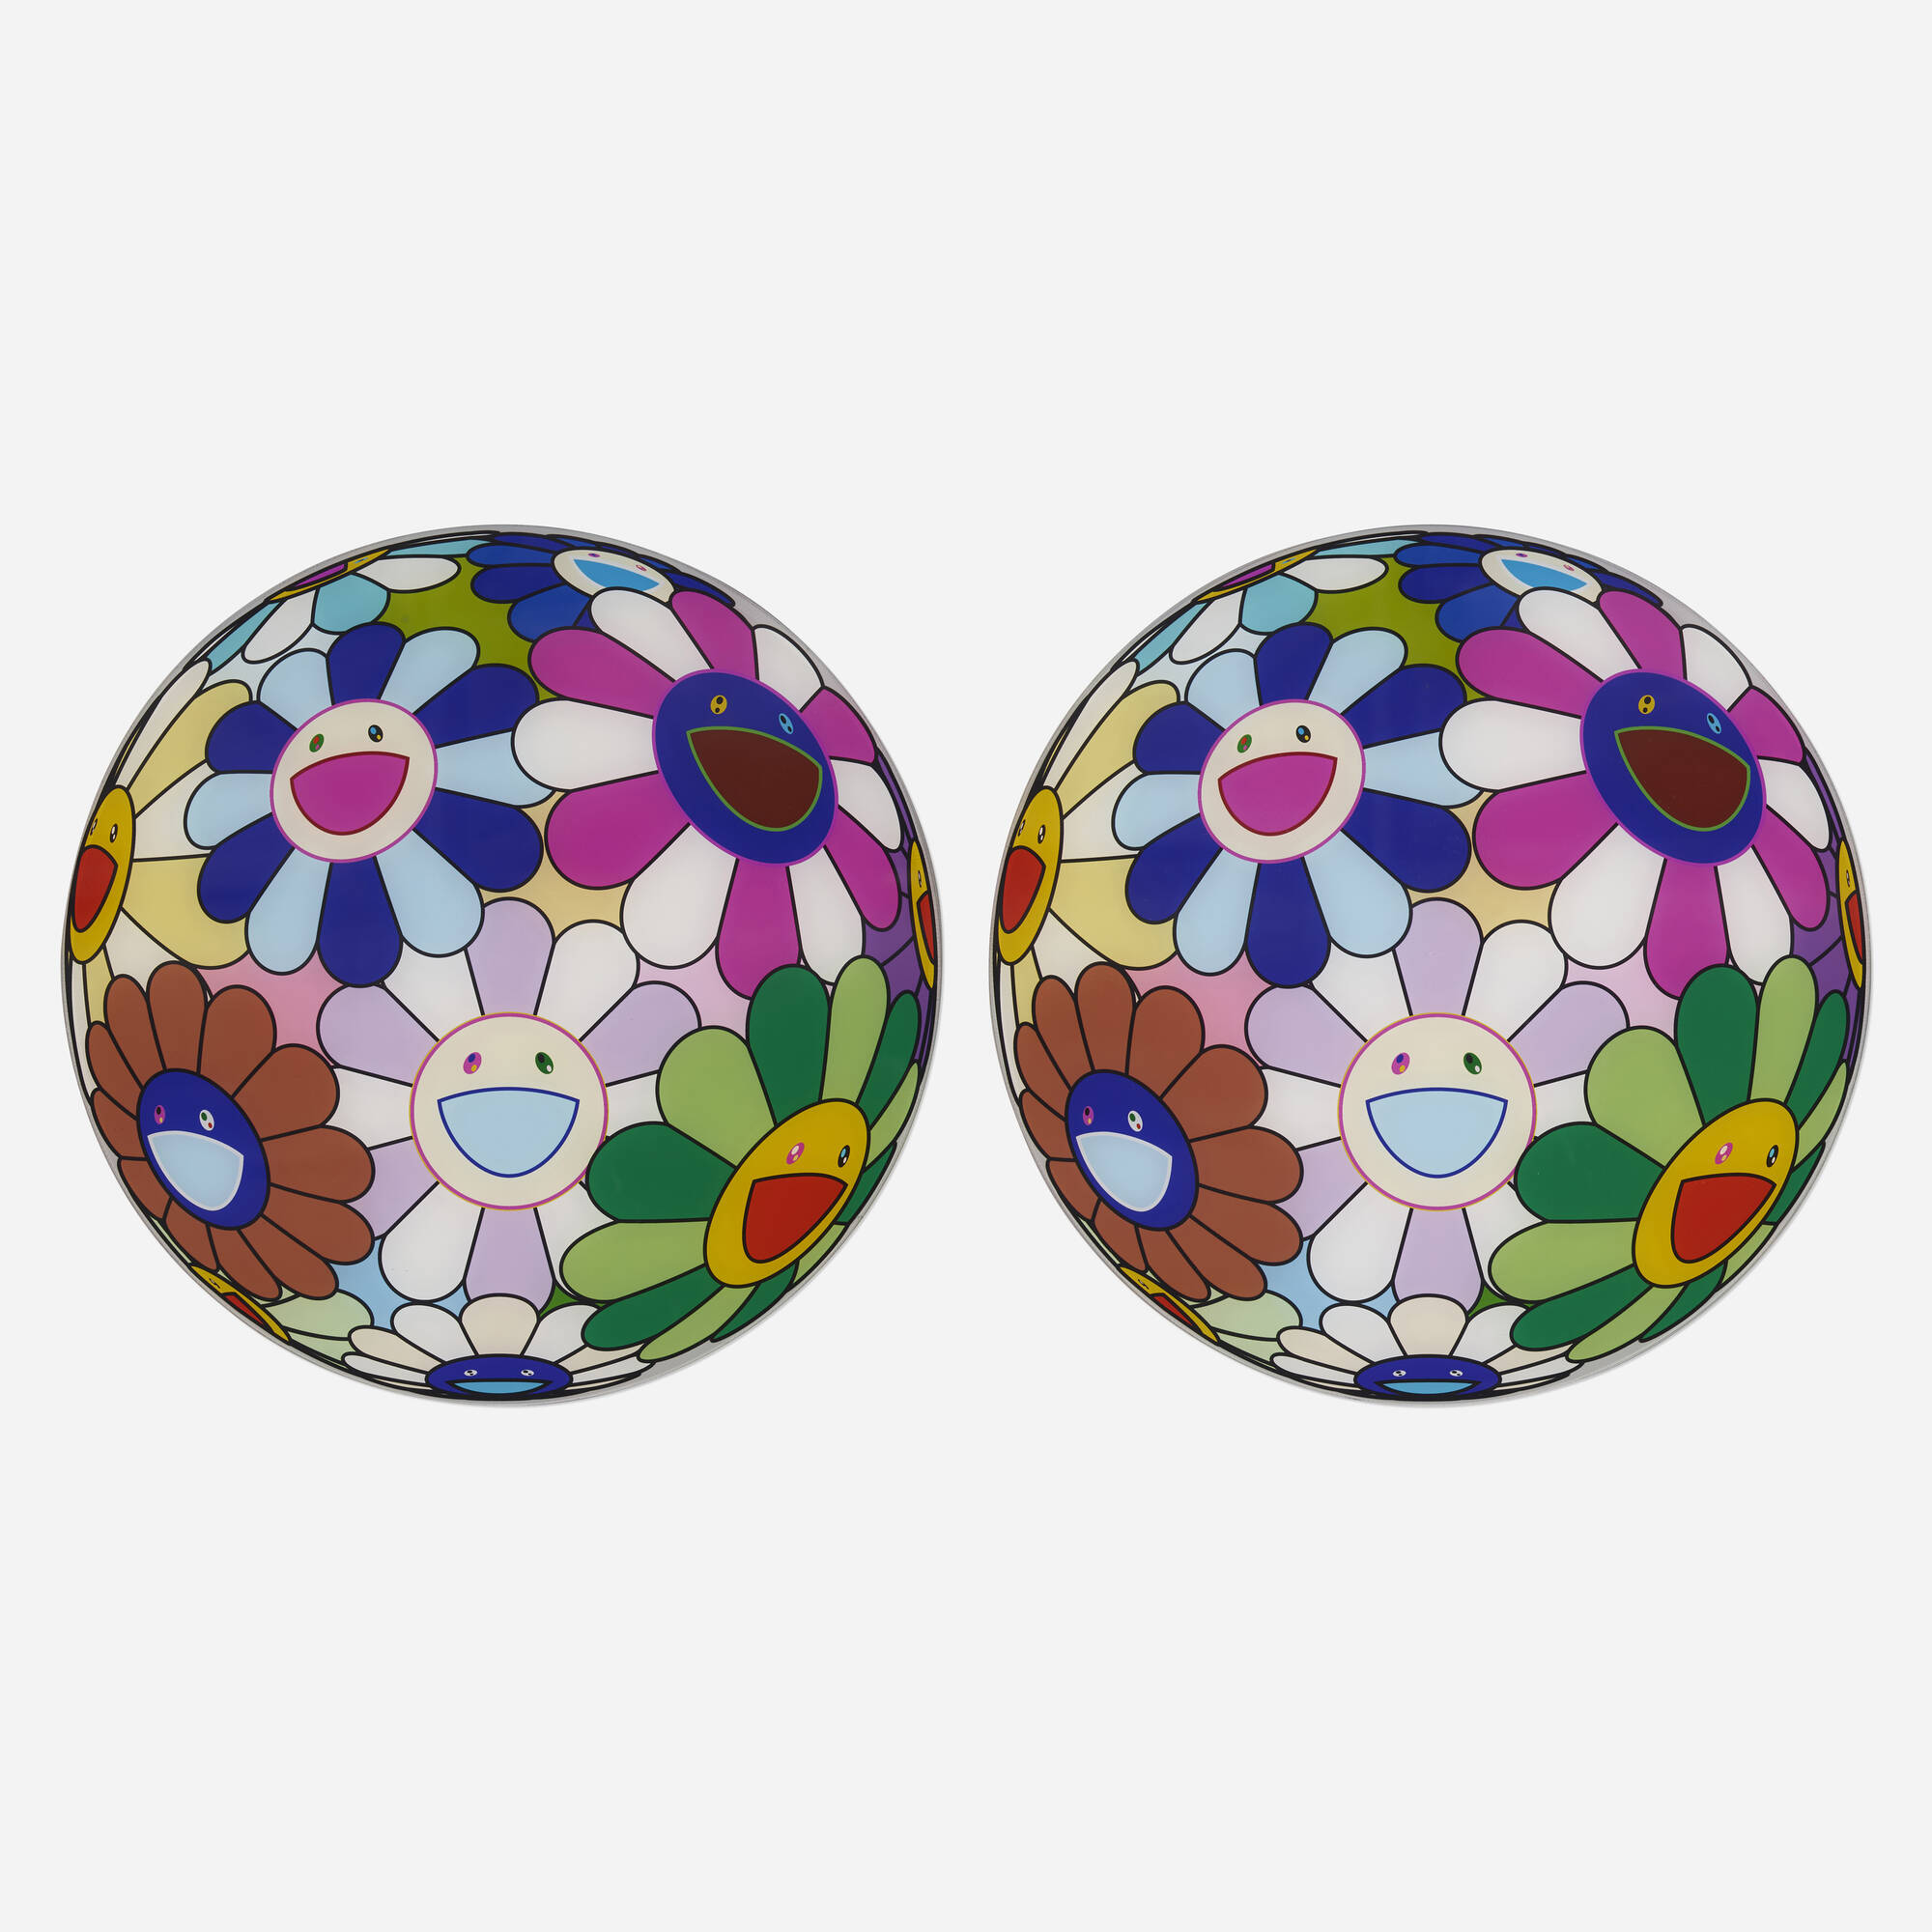 313: TAKASHI MURAKAMI, MOCA Flowerball chargers, set of two < 20, 21 Art:  The LA Edition, 1 August 2023 < Auctions